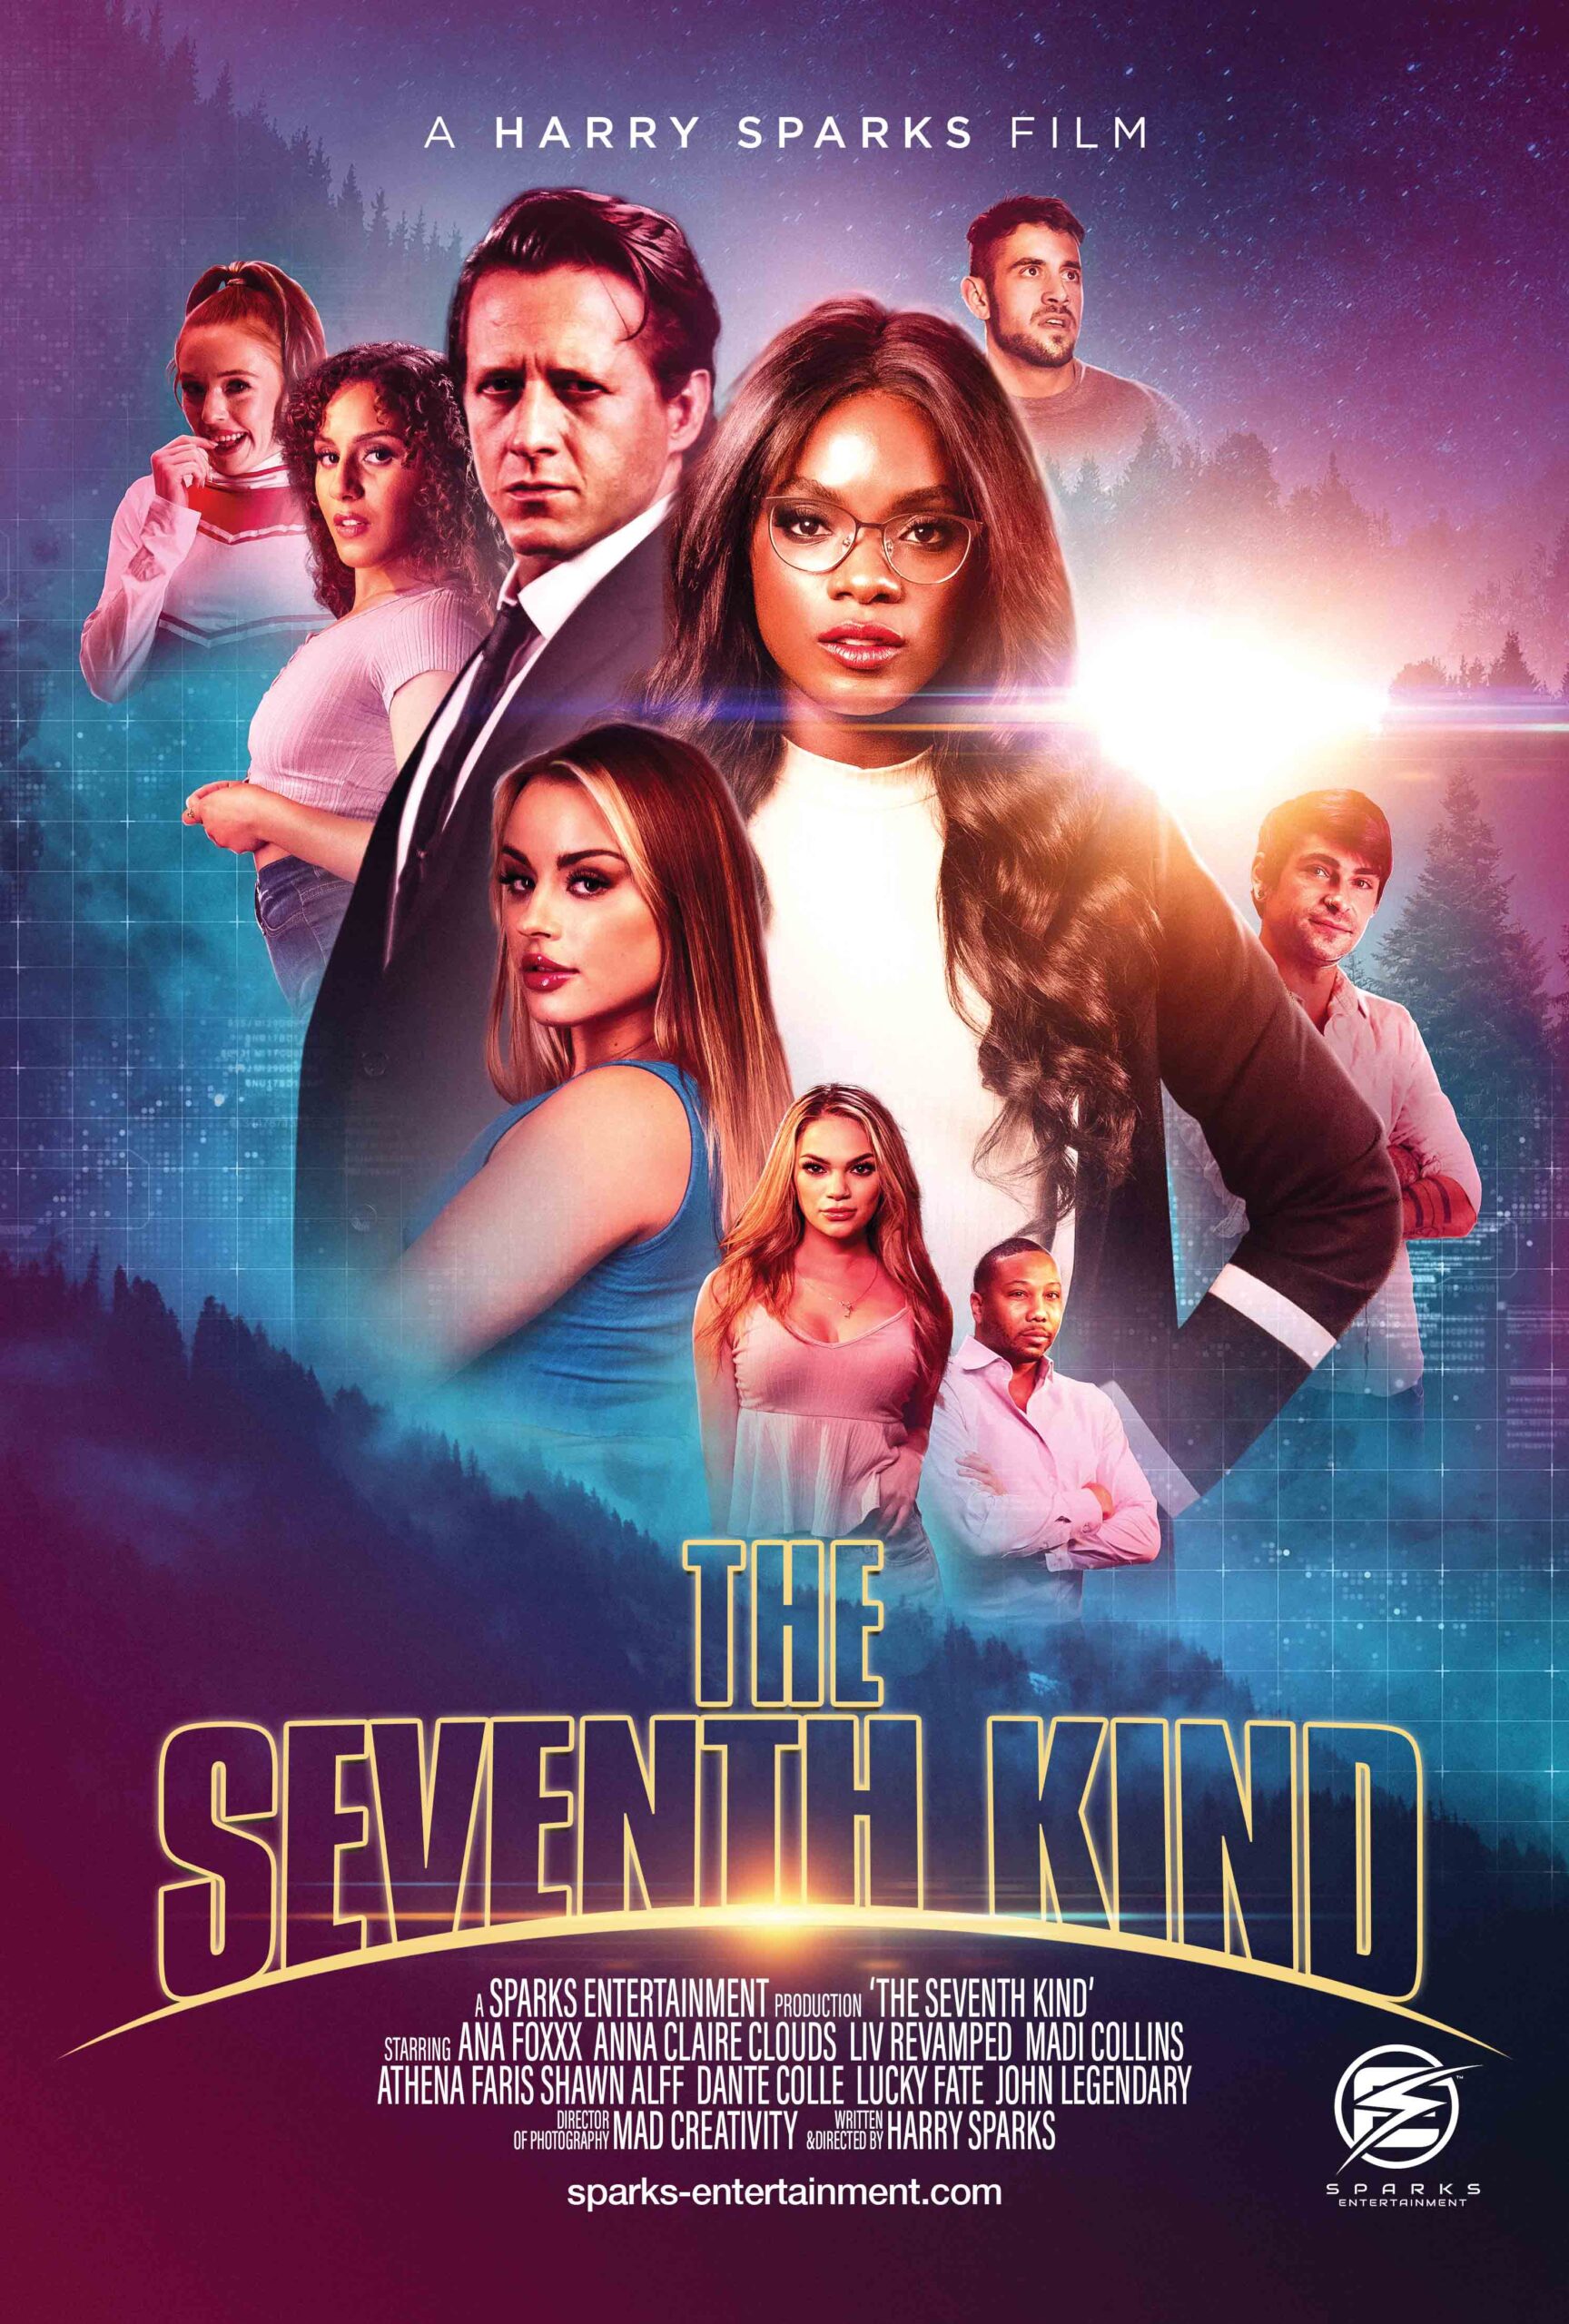 The Seventh Kind Movie Poster Film Poster - Movie Poster Designing Professional Movie Posters